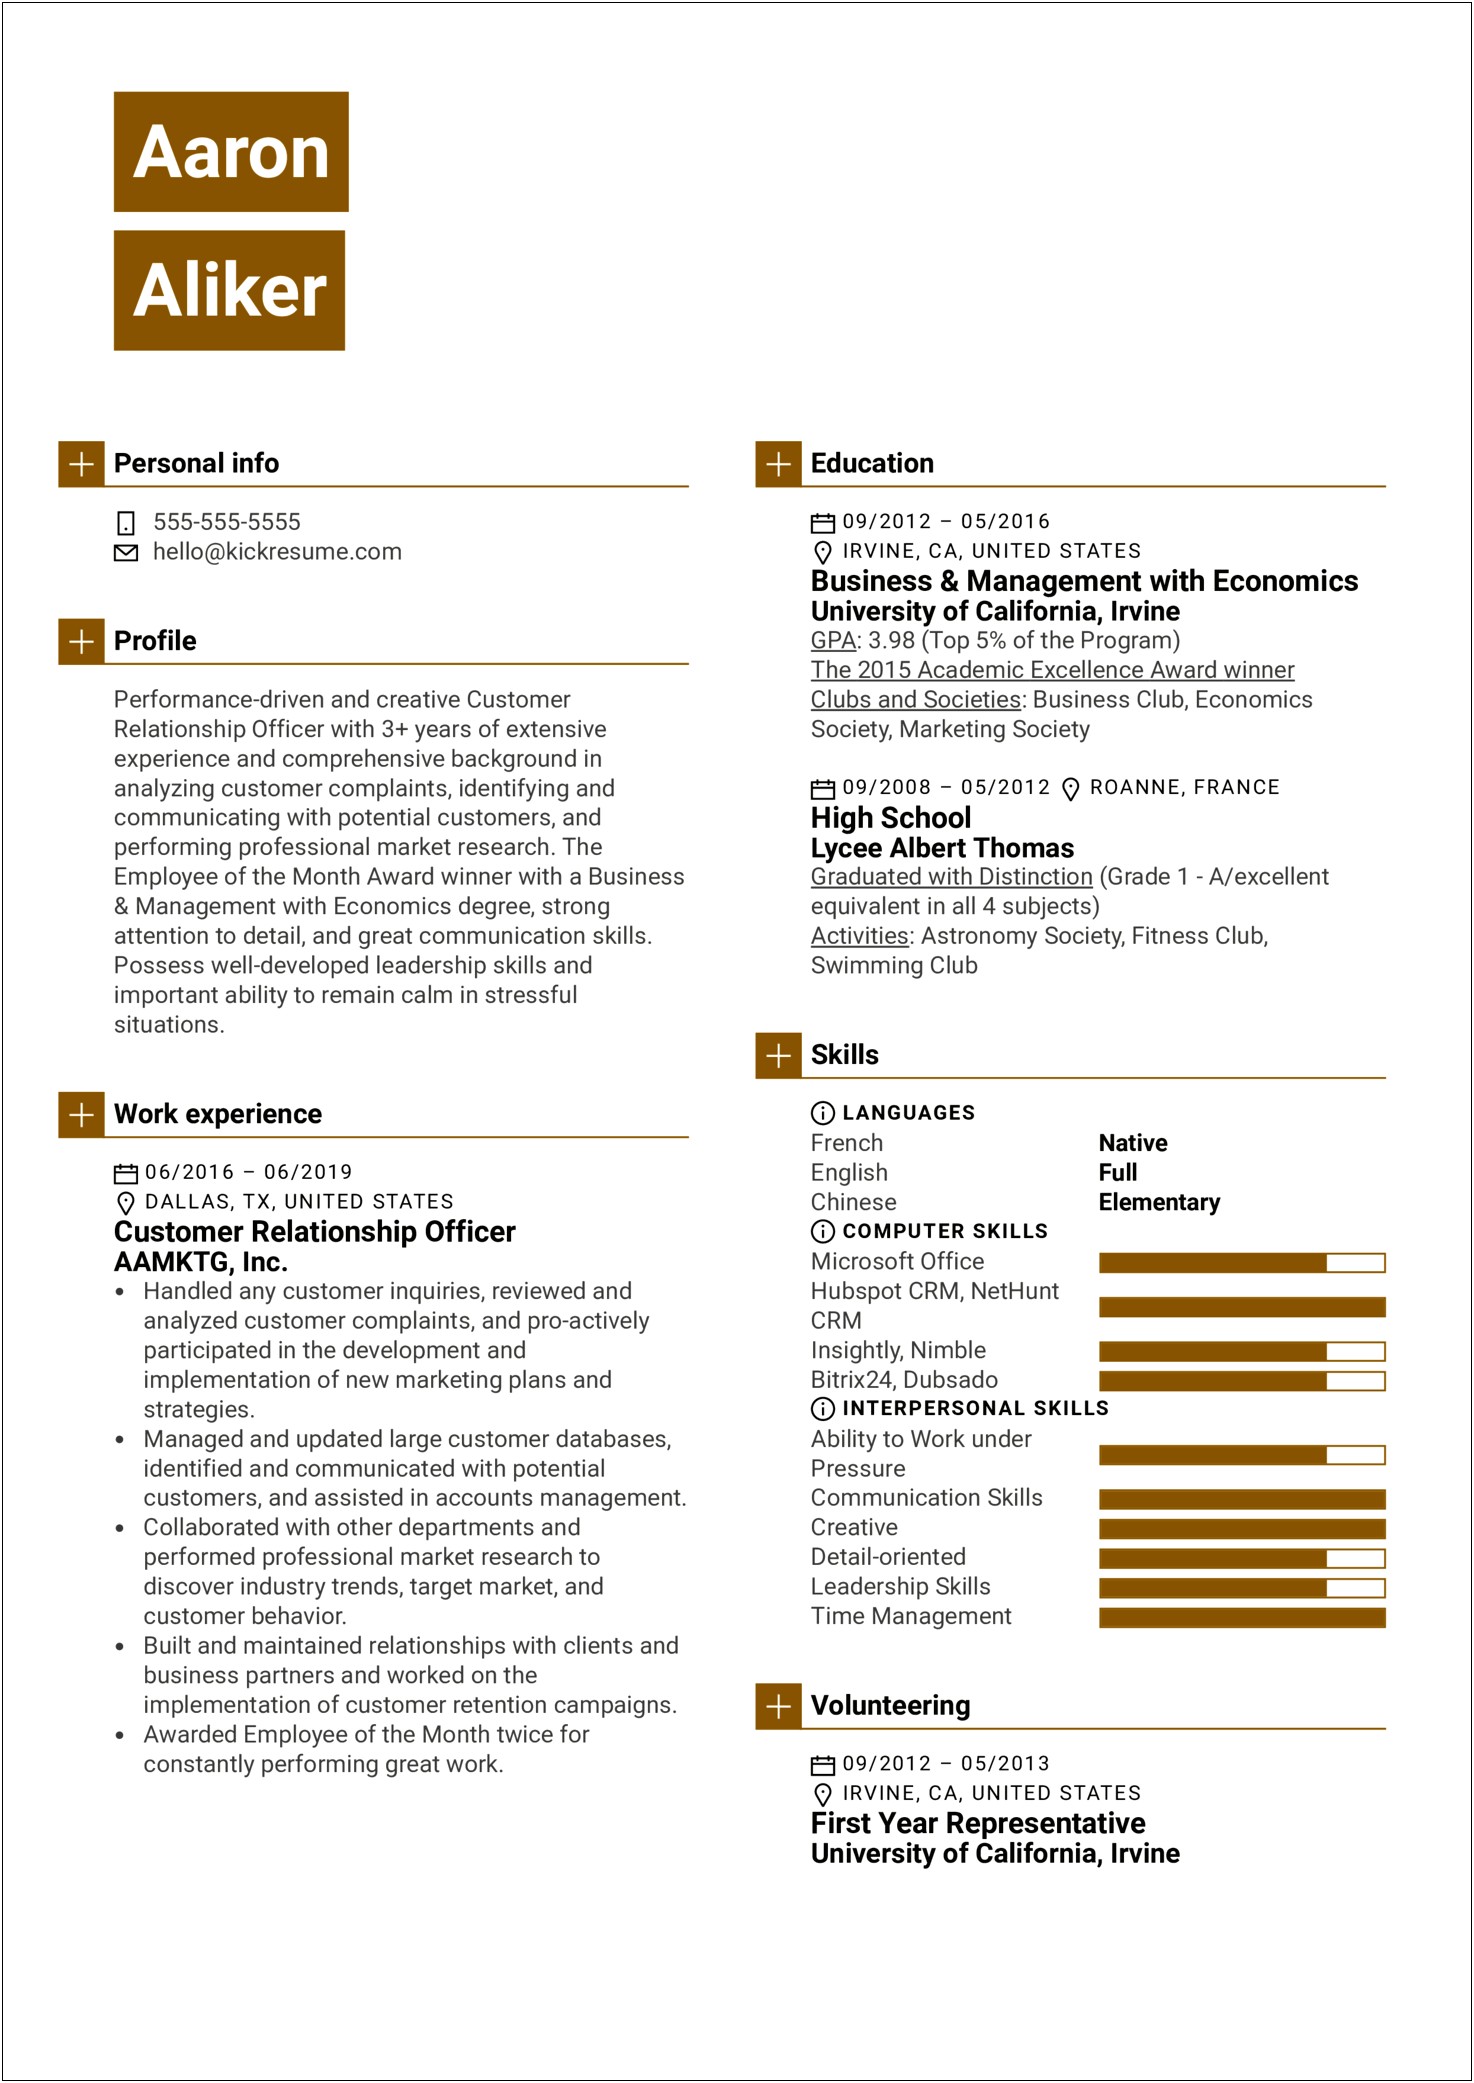 Resume Example For Customer Relationship Manager